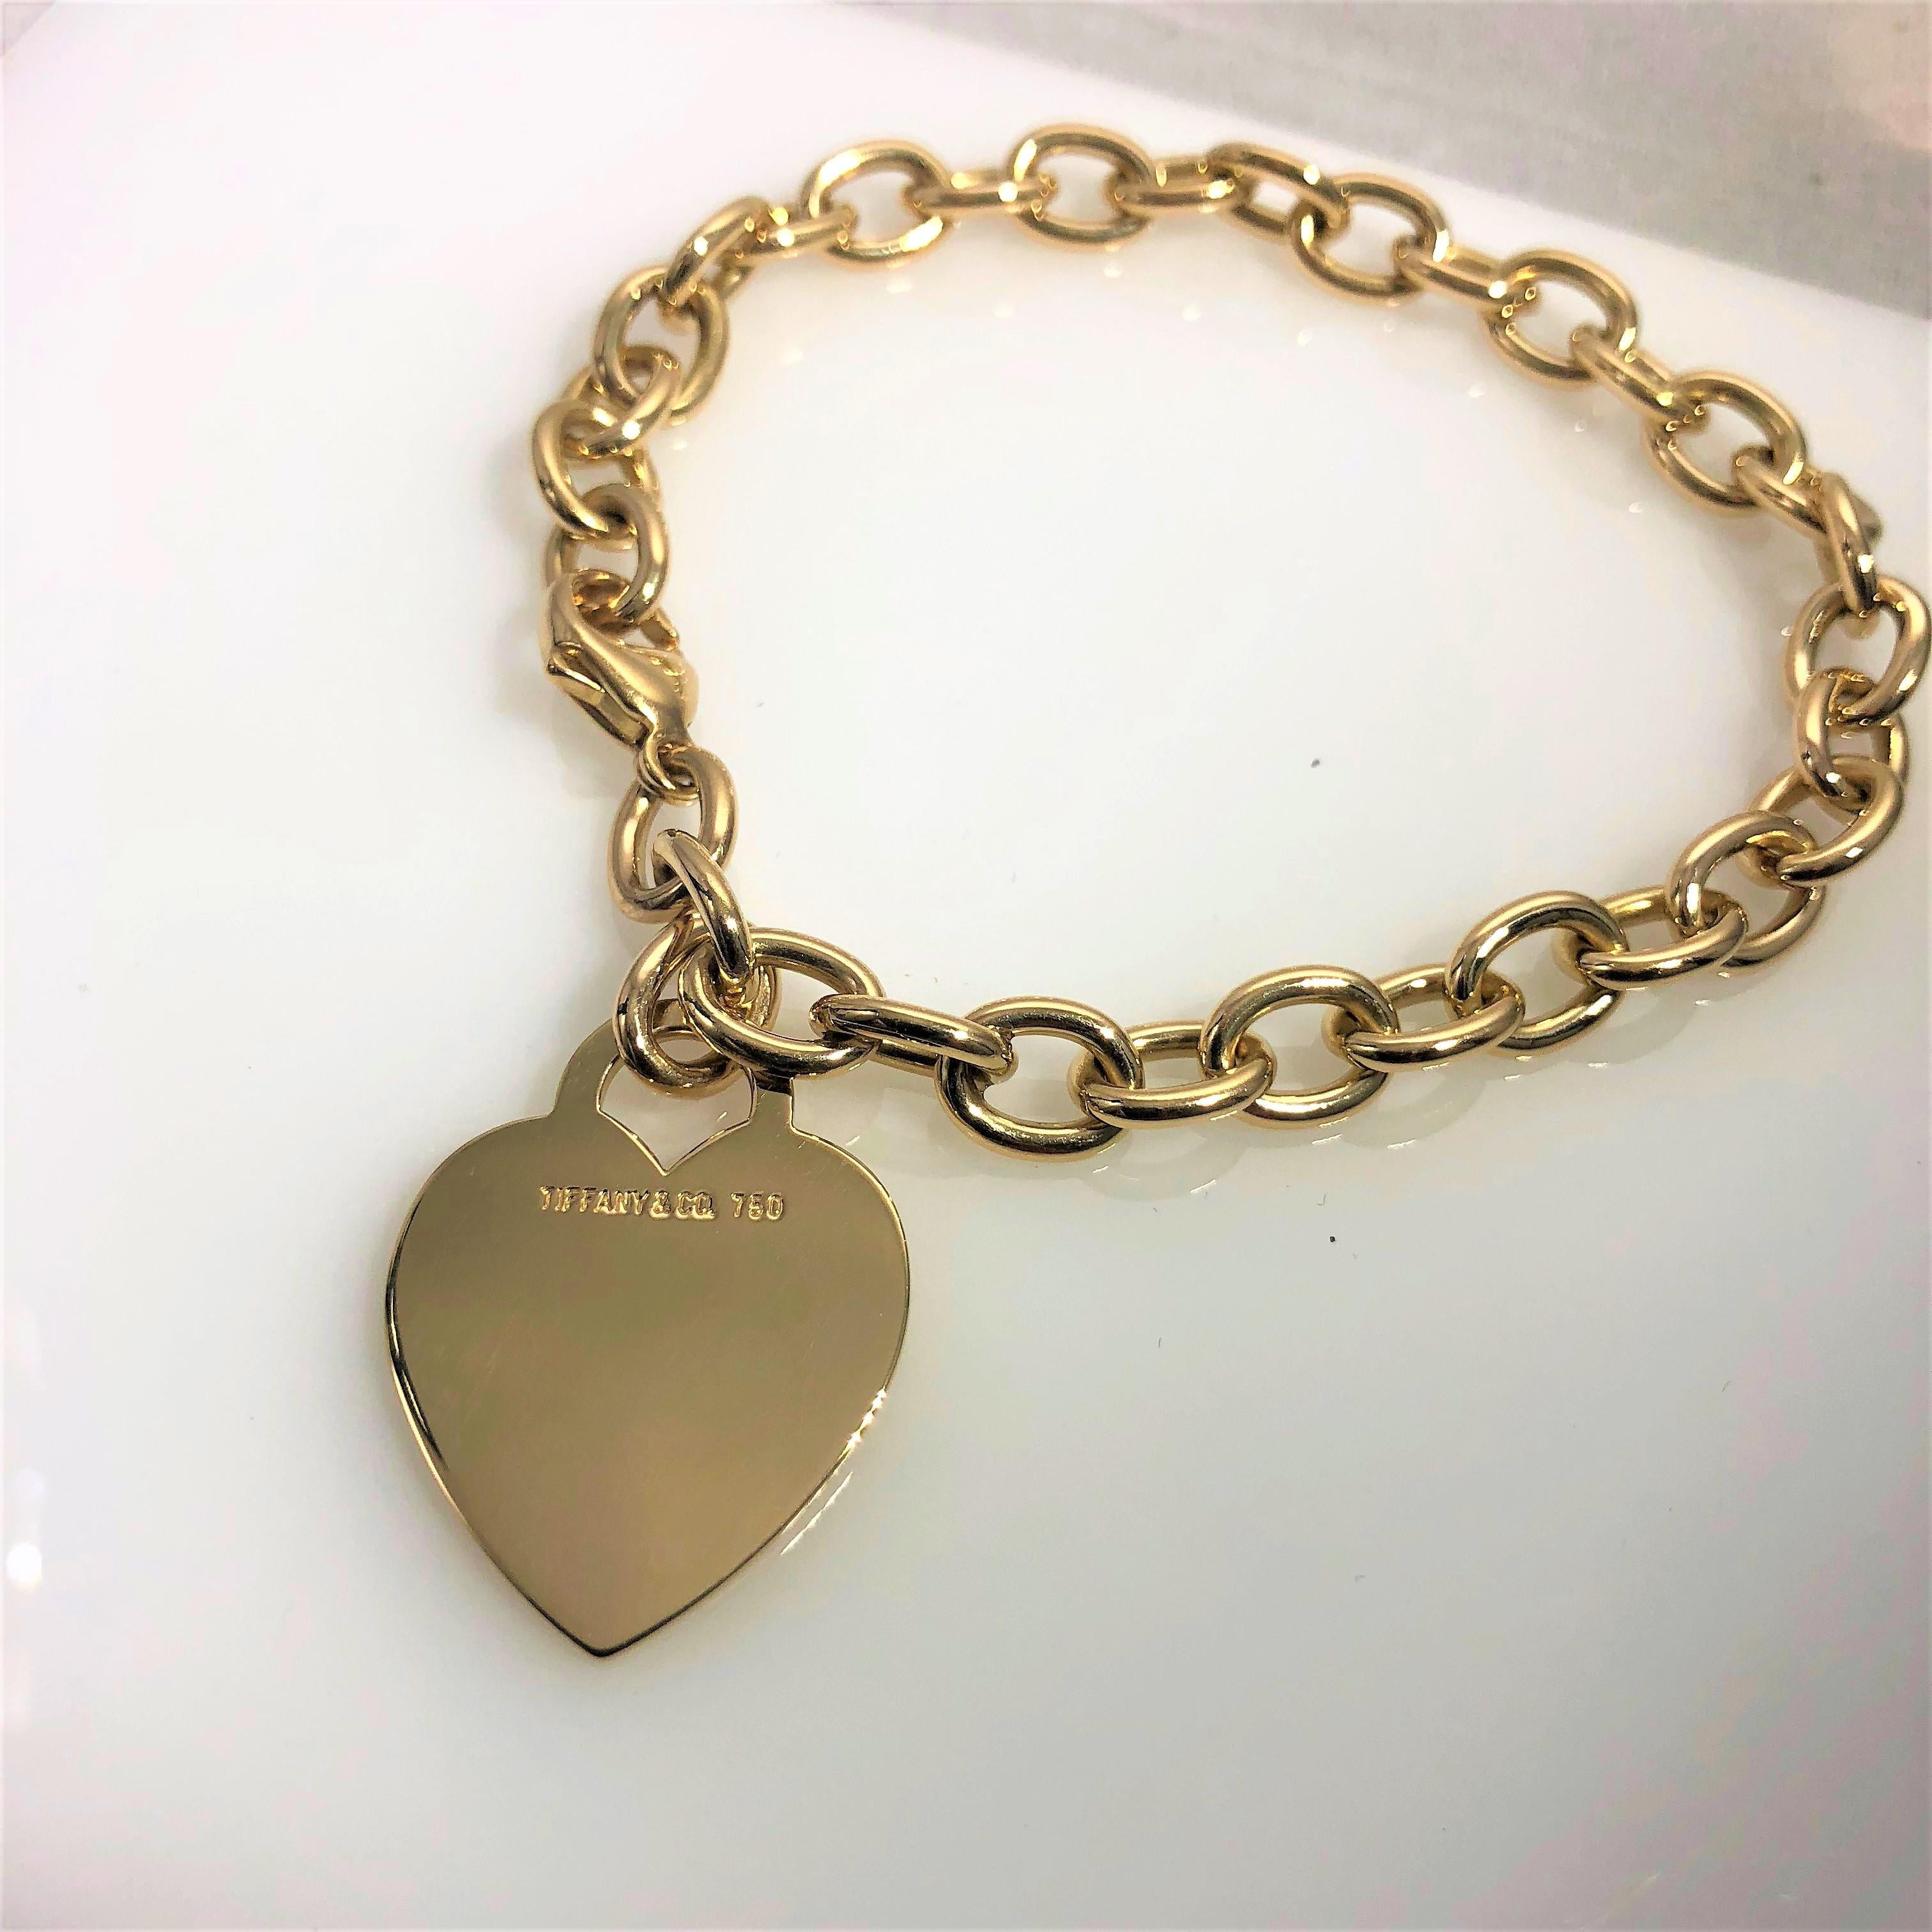 Tiffany&Co 18 Karat Heart Tag Charm Bracelet. This piece is a forever classic. Created in 18 karat yellow gold, stamped 750, this piece weighs 28.8 grams/ 18.5 dwt. Charm bracelet/ chain link design, with tag style heart charm stamped with logo